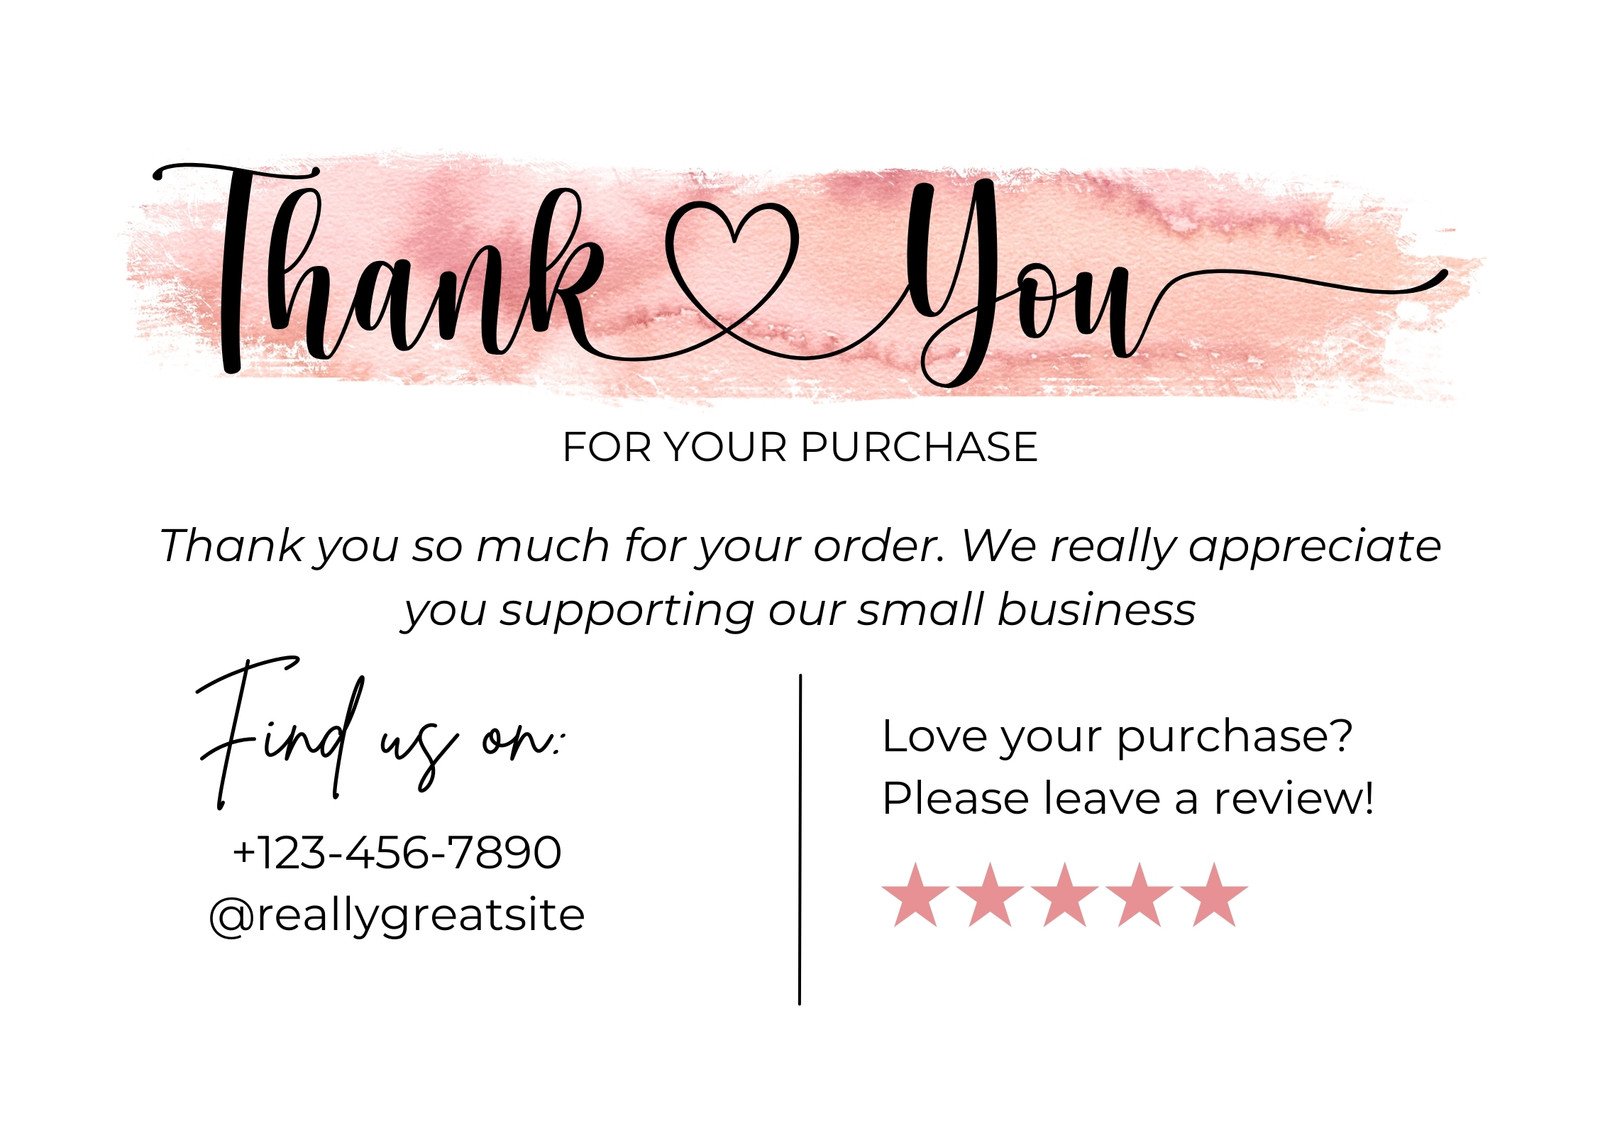 Thank You Card Design Ideas for Small Business Owners - Cards For Causes